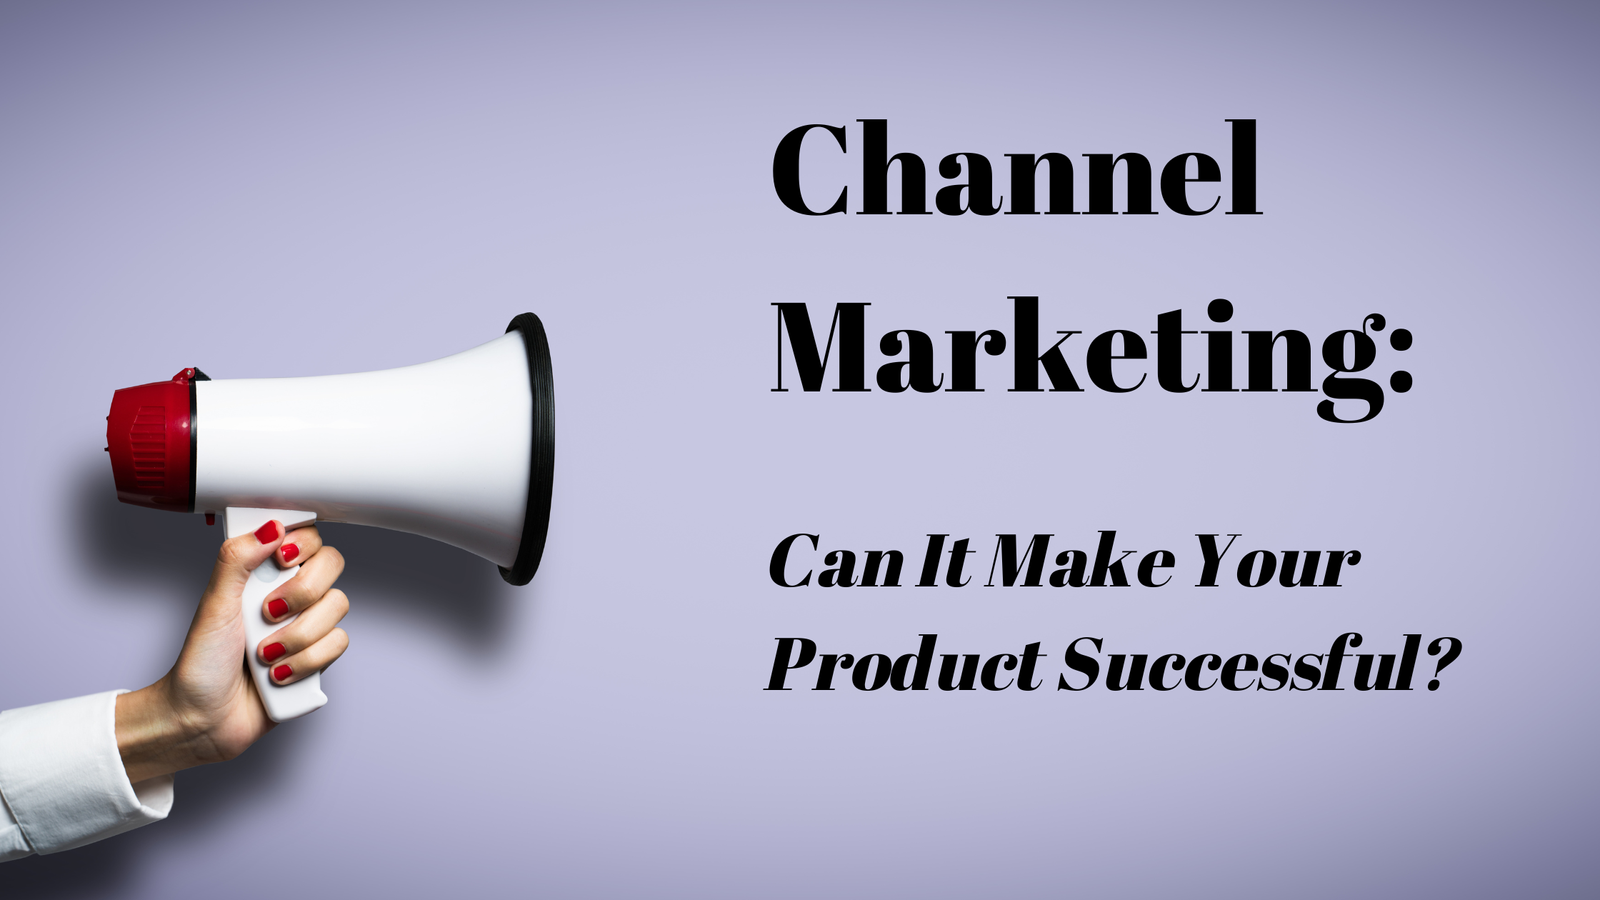 Benefits of channel marketing